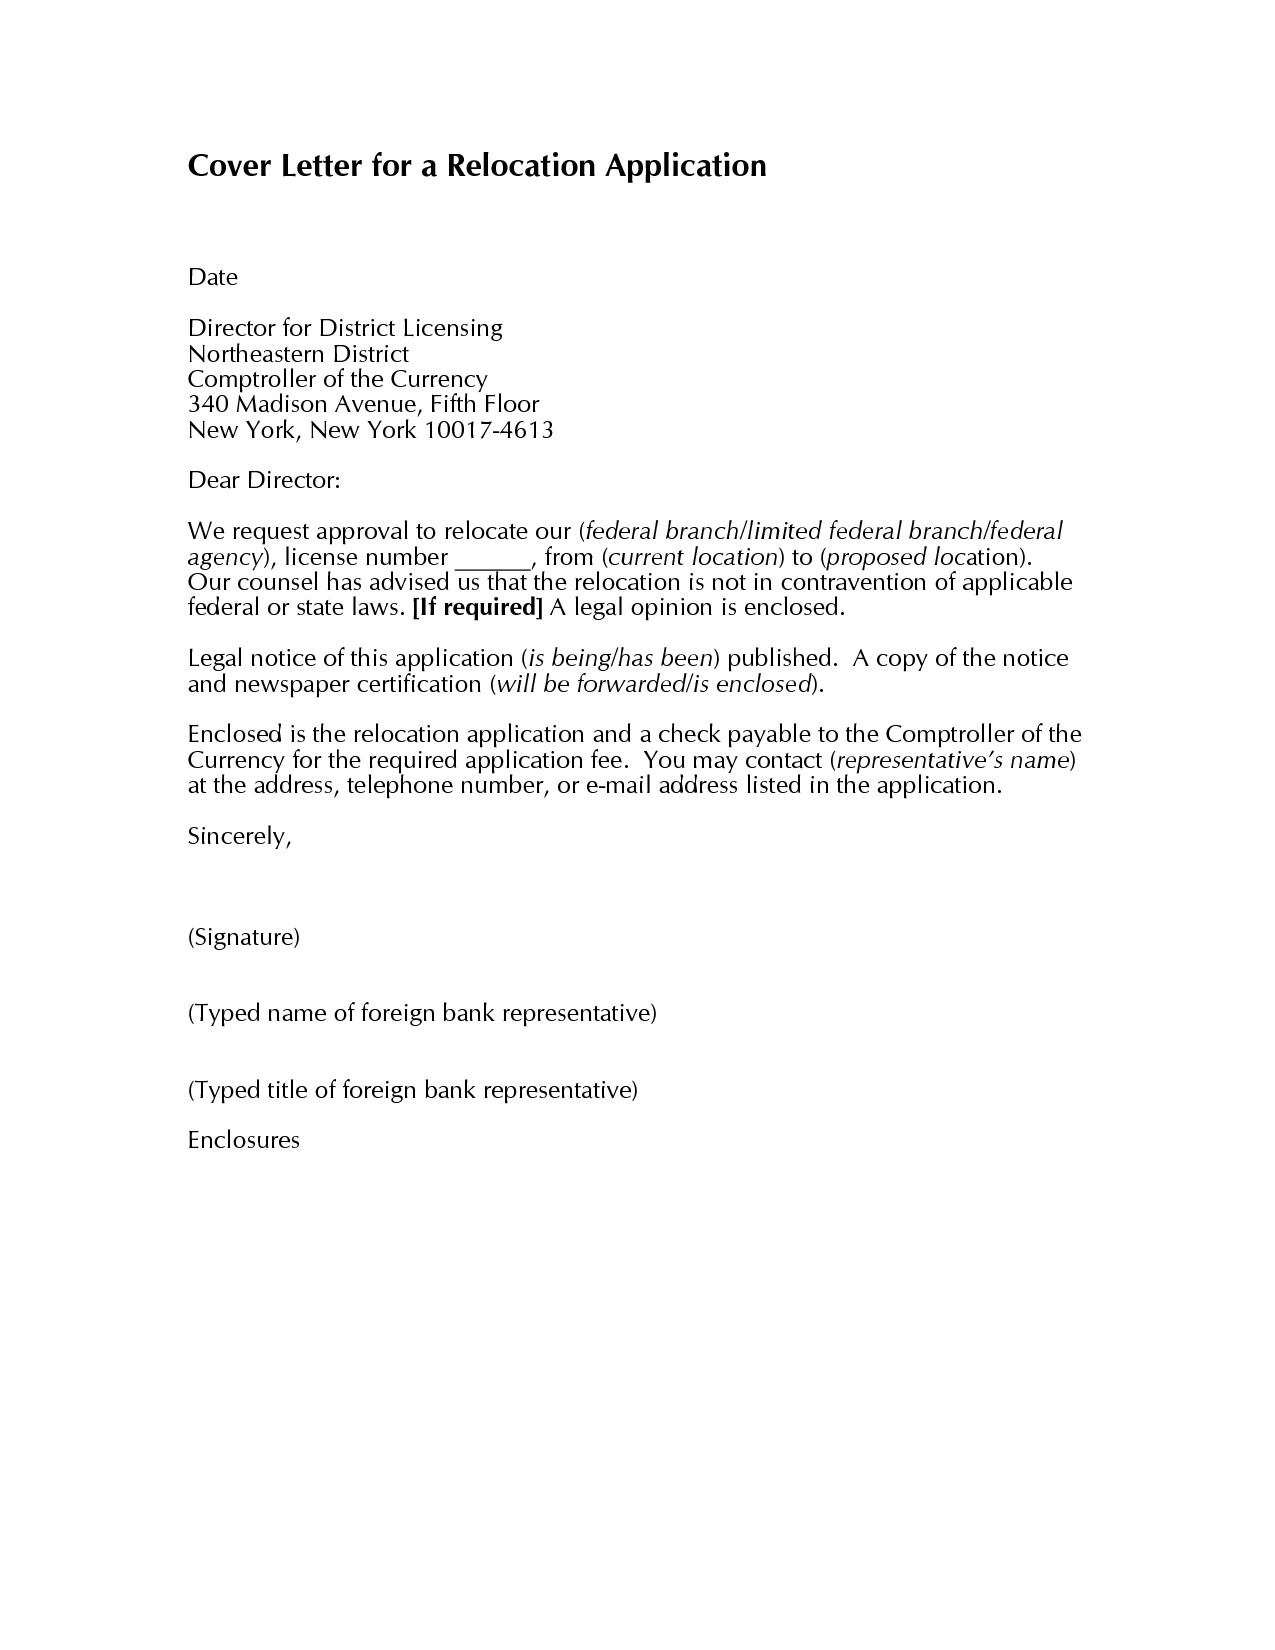 sample relocation cover letter template